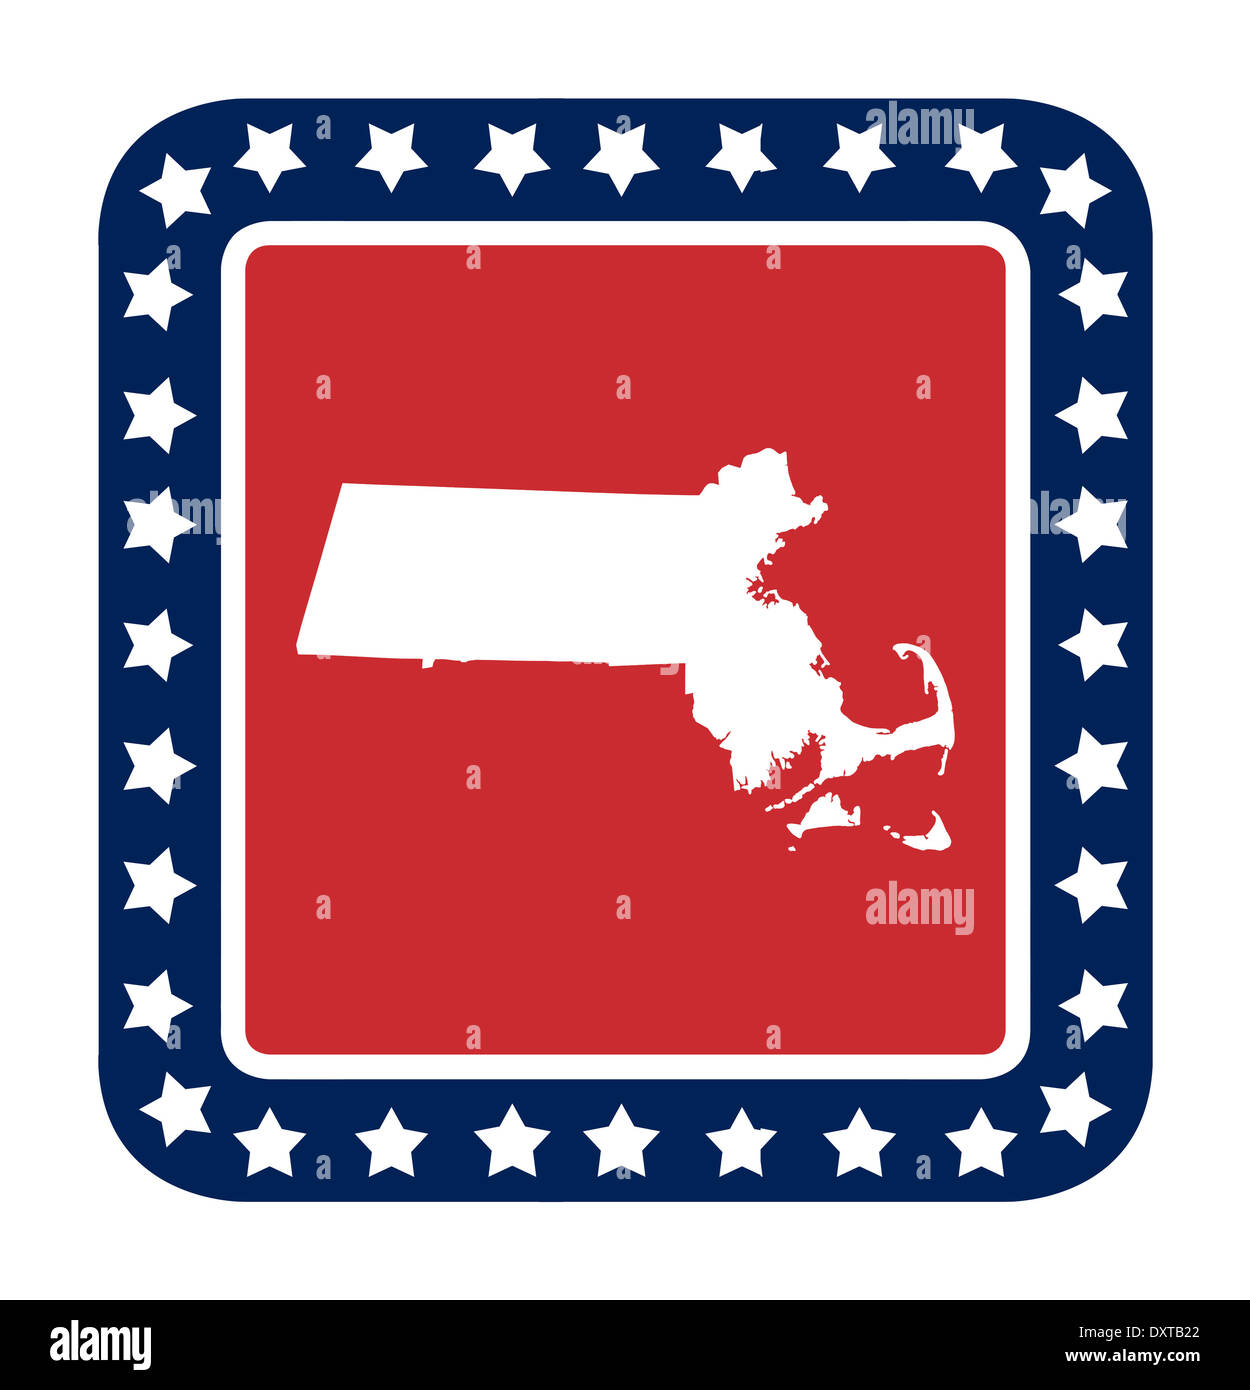 Massachusetts state button on American flag in flat web design style, isolated on white background. Stock Photo